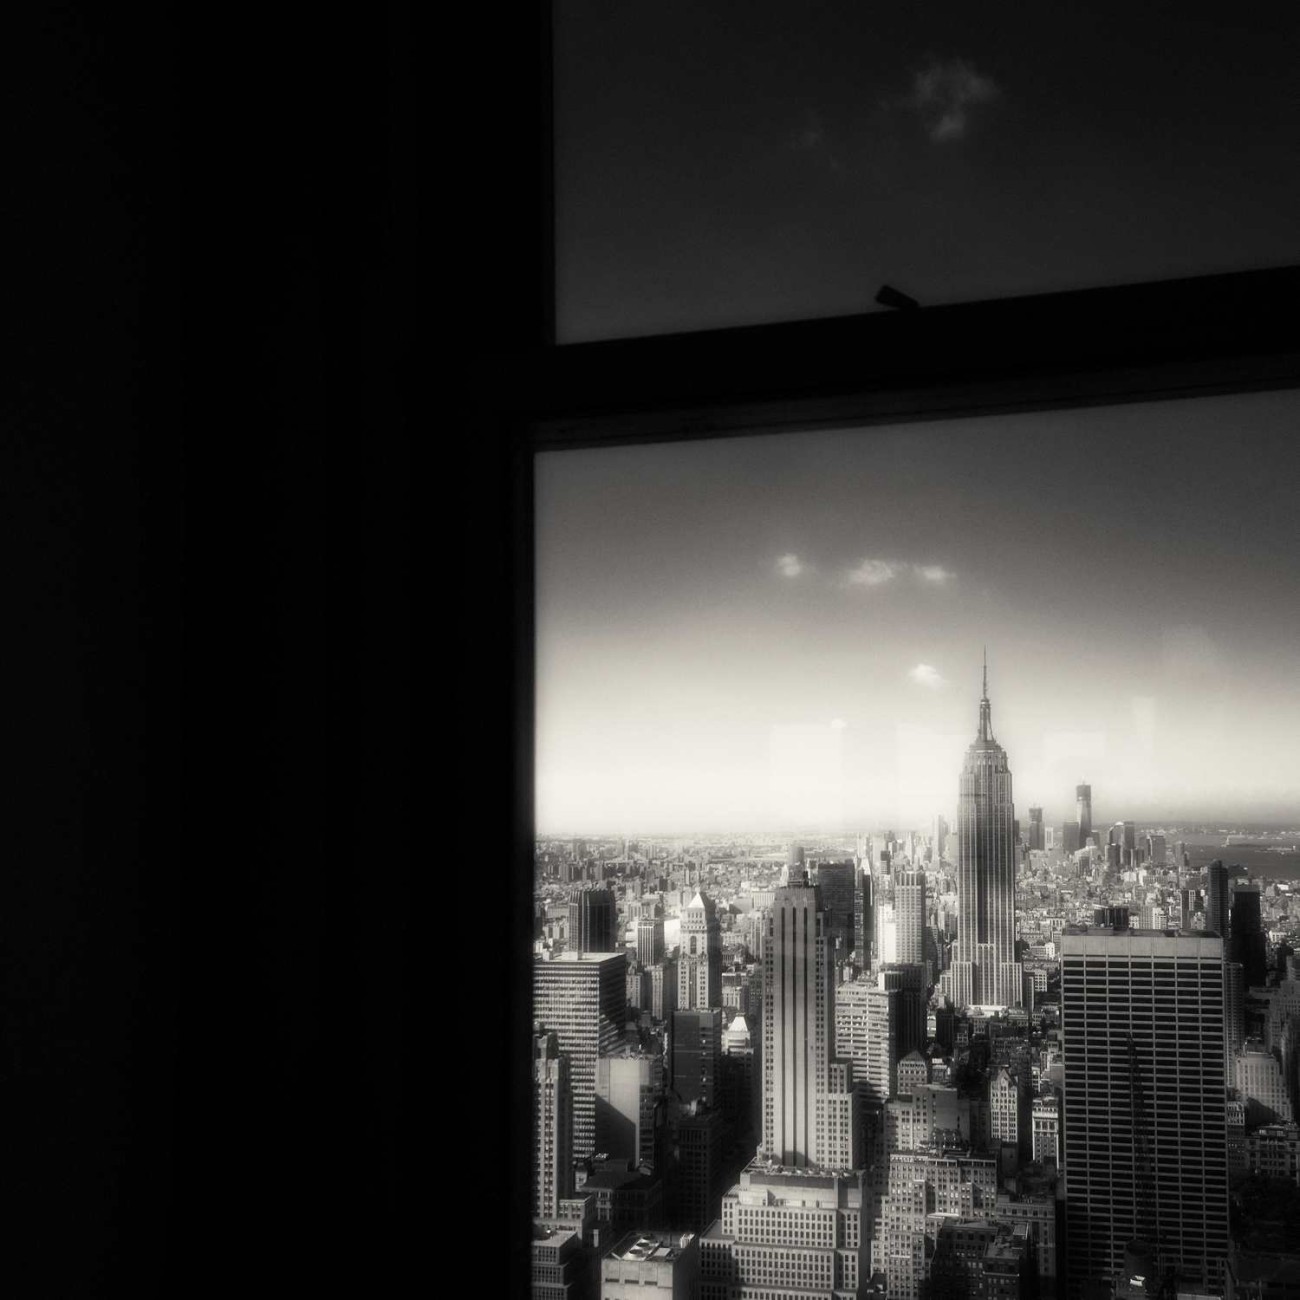 Empire State Building and window, New York, 2012